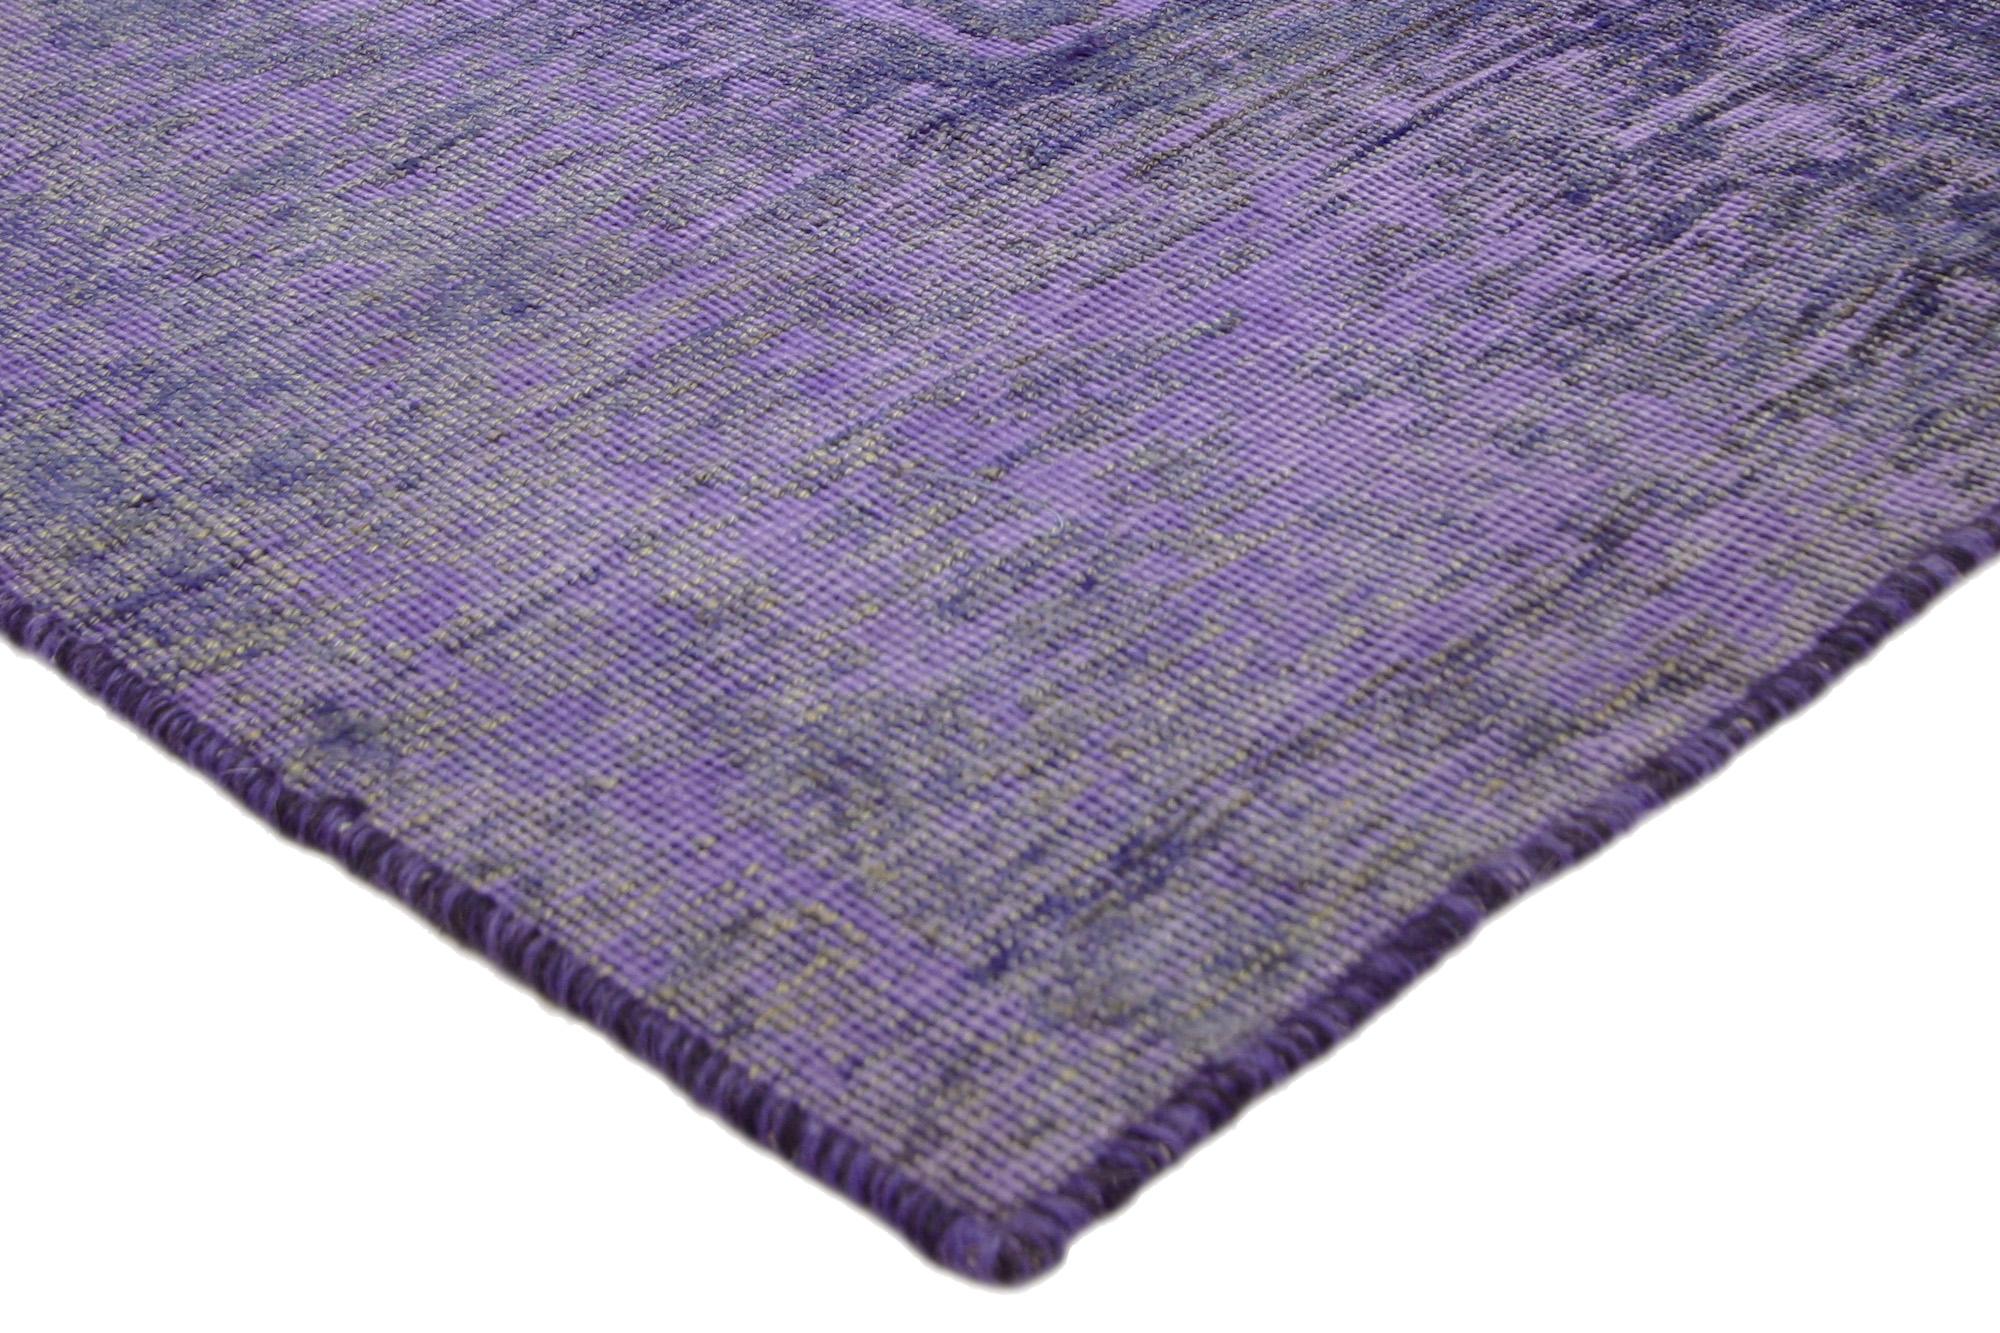 60600 Vintage Turkish Purple Overdyed Rug, 06'07 x 09'10. 
Brace yourself for a beguiling dance of Bohemian Rhapsody entwined with Maximalist flair in the form of this hand-knotted wool vintage Turkish overdyed rug. This is not merely a rug; it's a